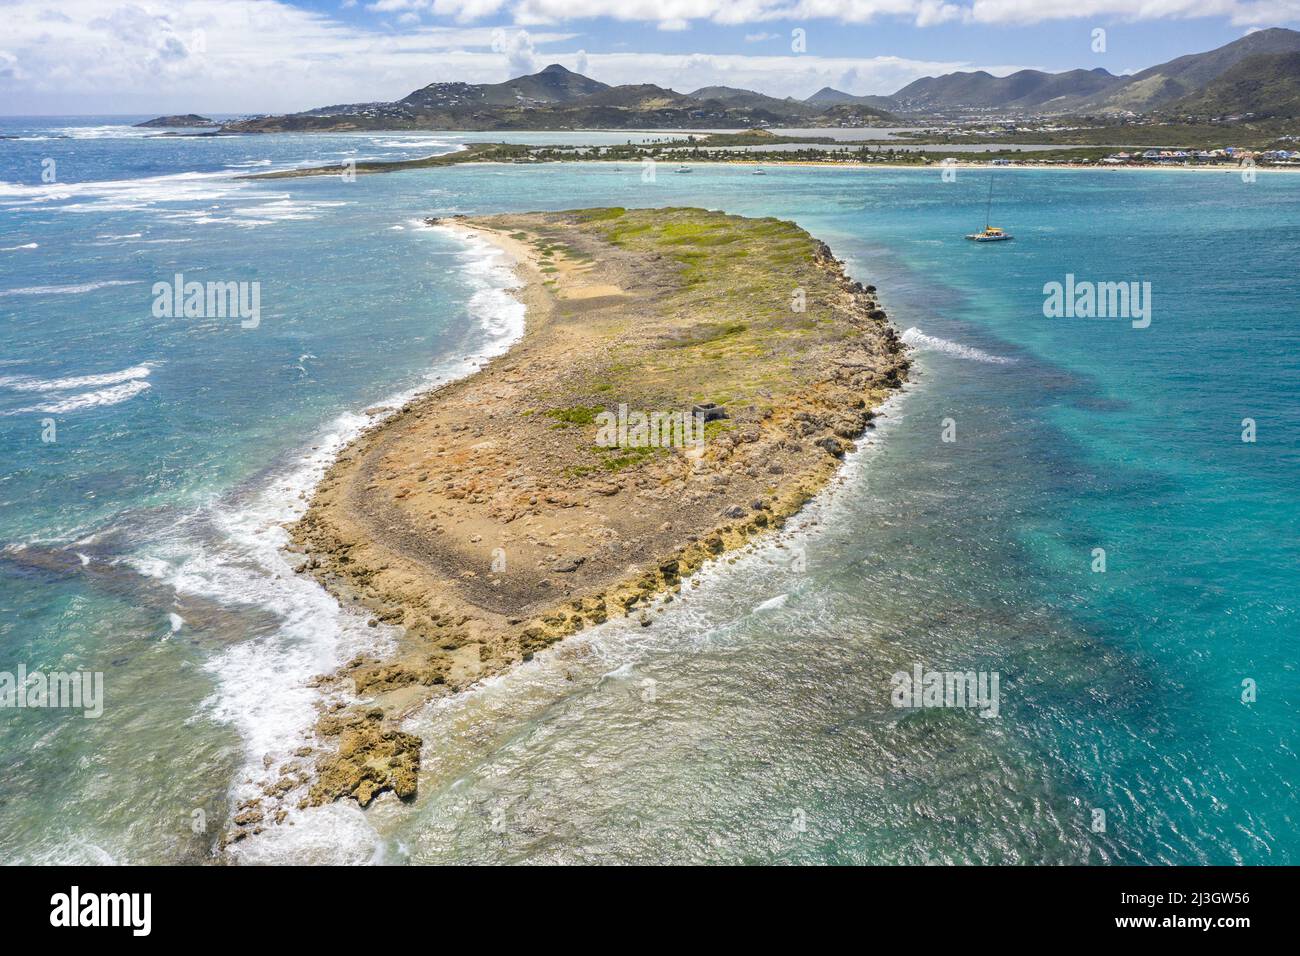 France, Lesser Antilles, French West Indies, Saint-Martin, National Nature Reserve (aerial view) of Caye Verte islet Stock Photo